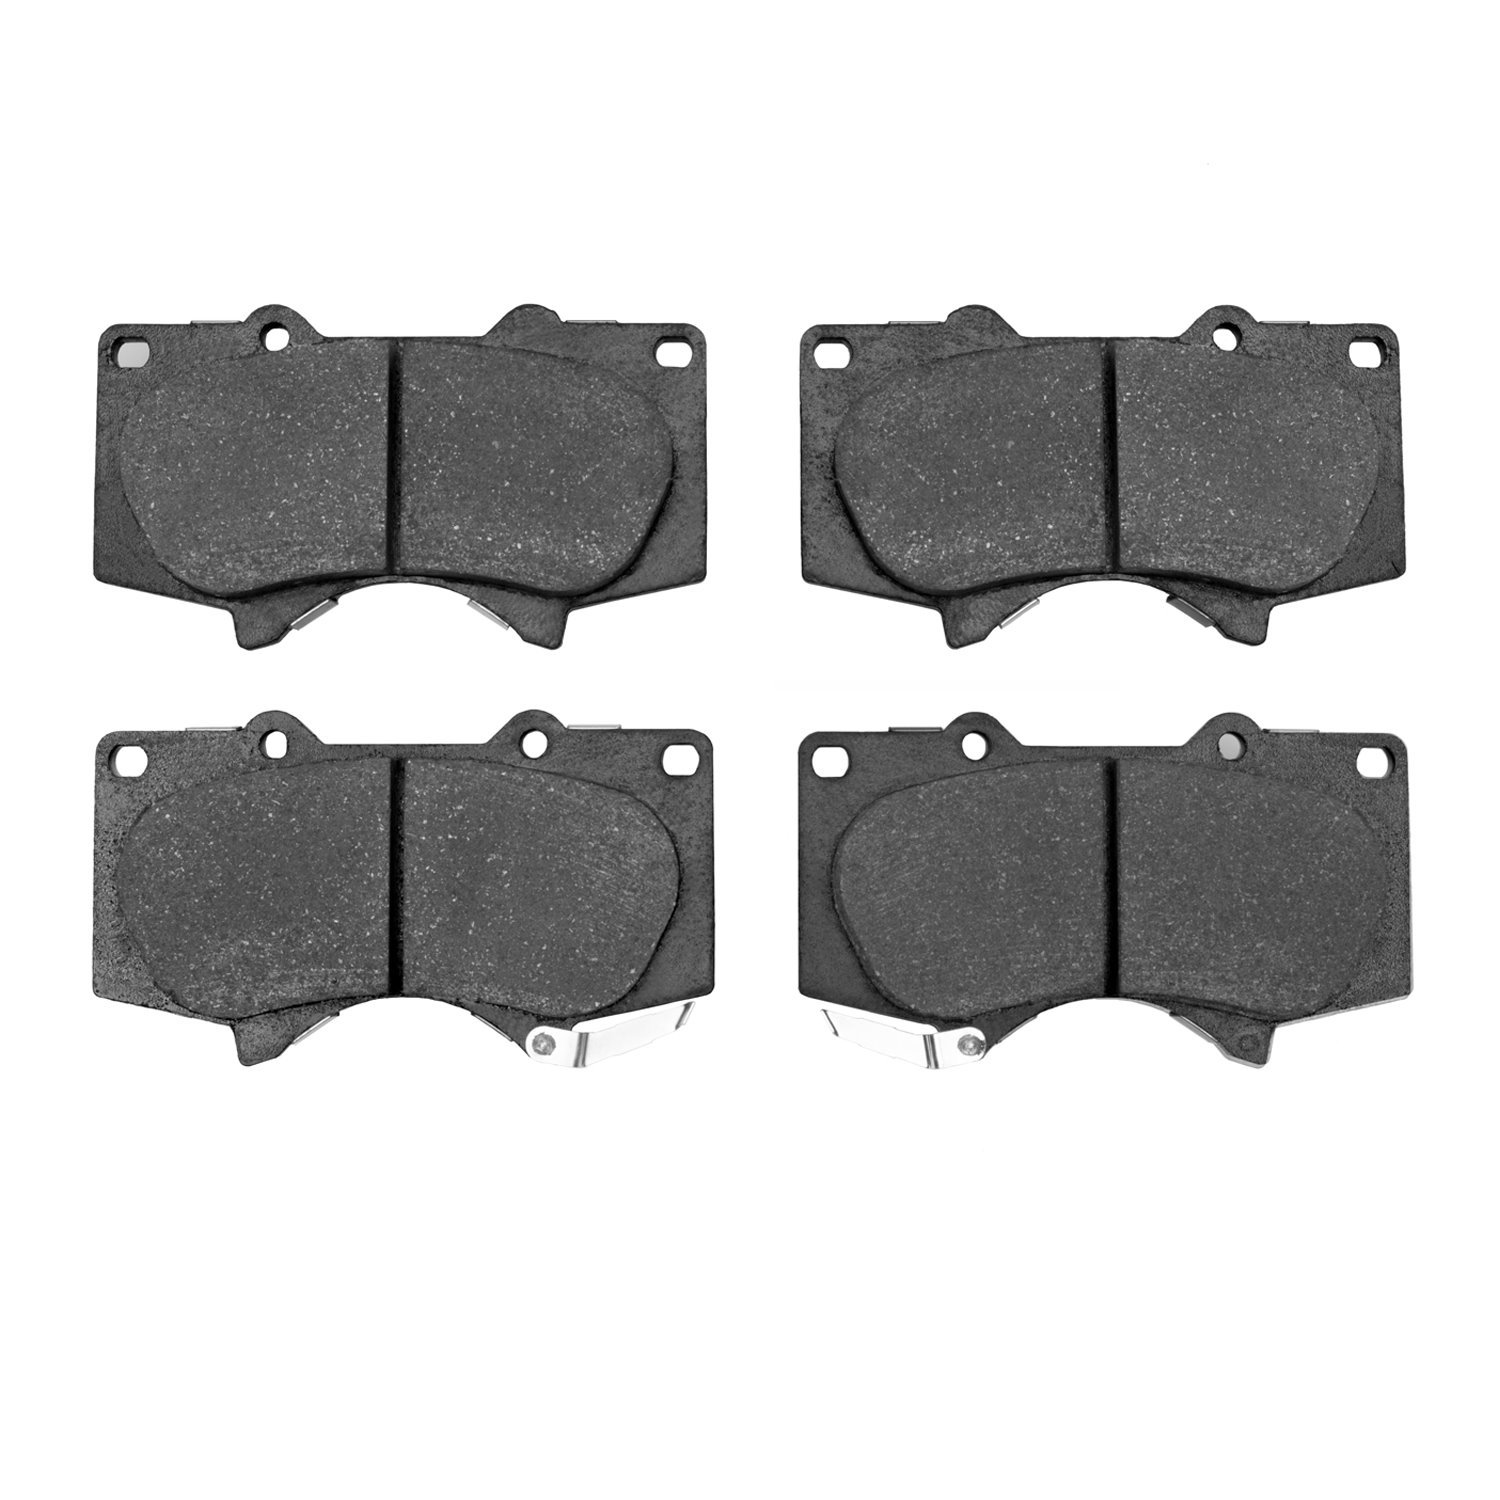 1310-0976-00 3000-Series Ceramic Brake Pads, Fits Select Multiple Makes/Models, Position: Front